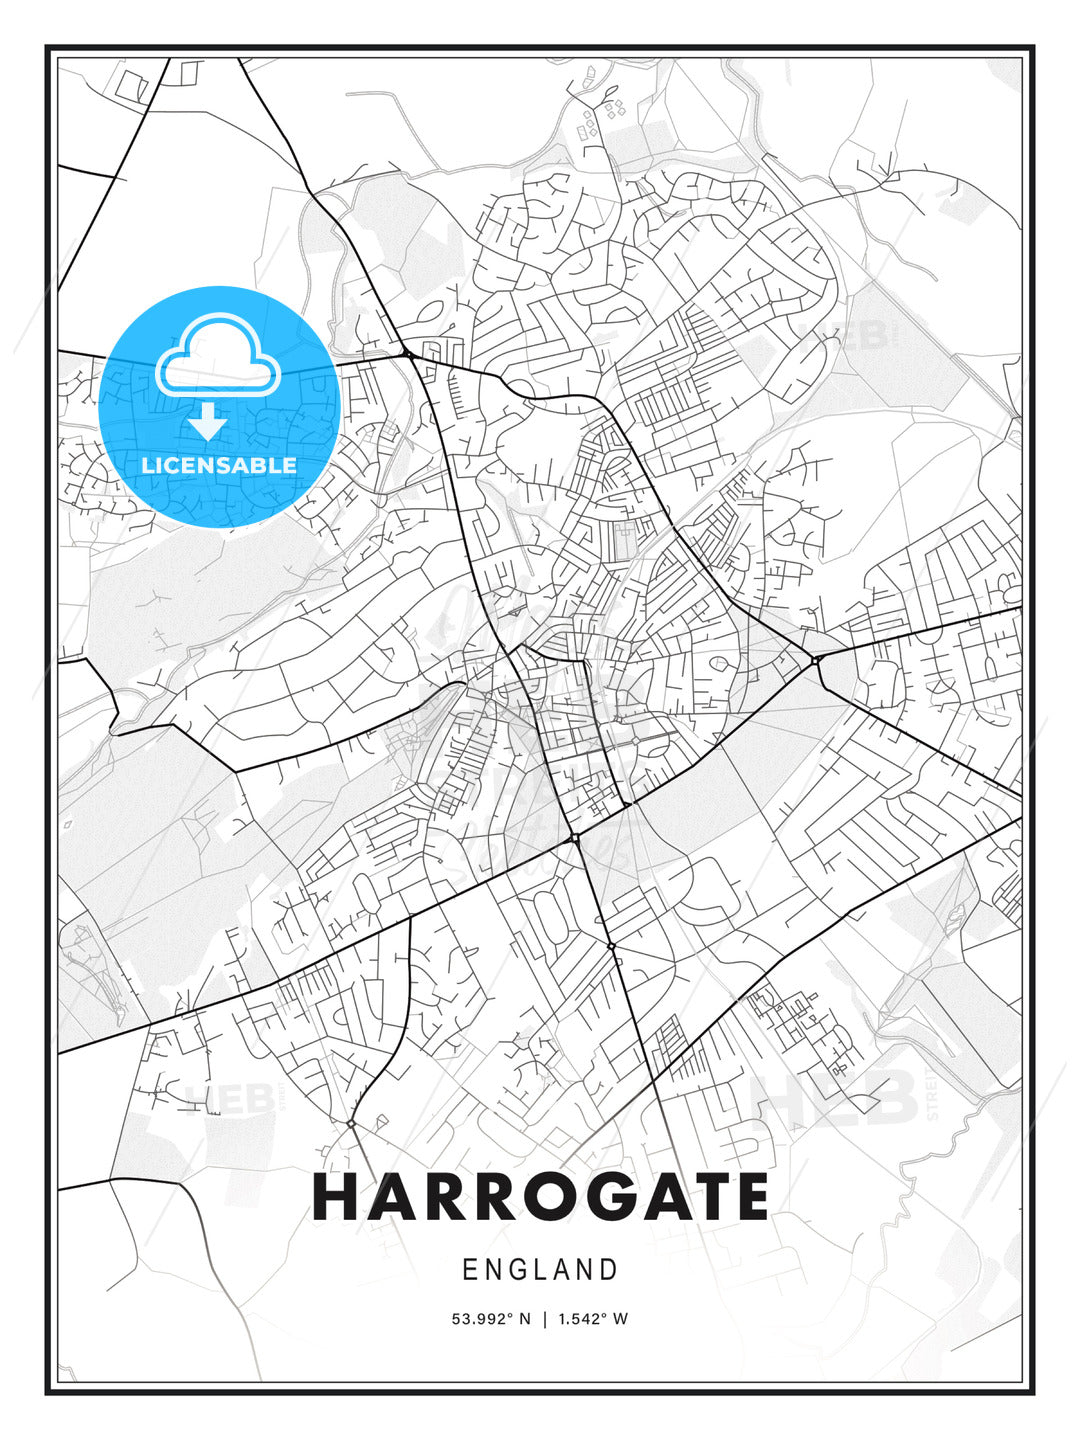 Harrogate, England, Modern Print Template in Various Formats - HEBSTREITS Sketches